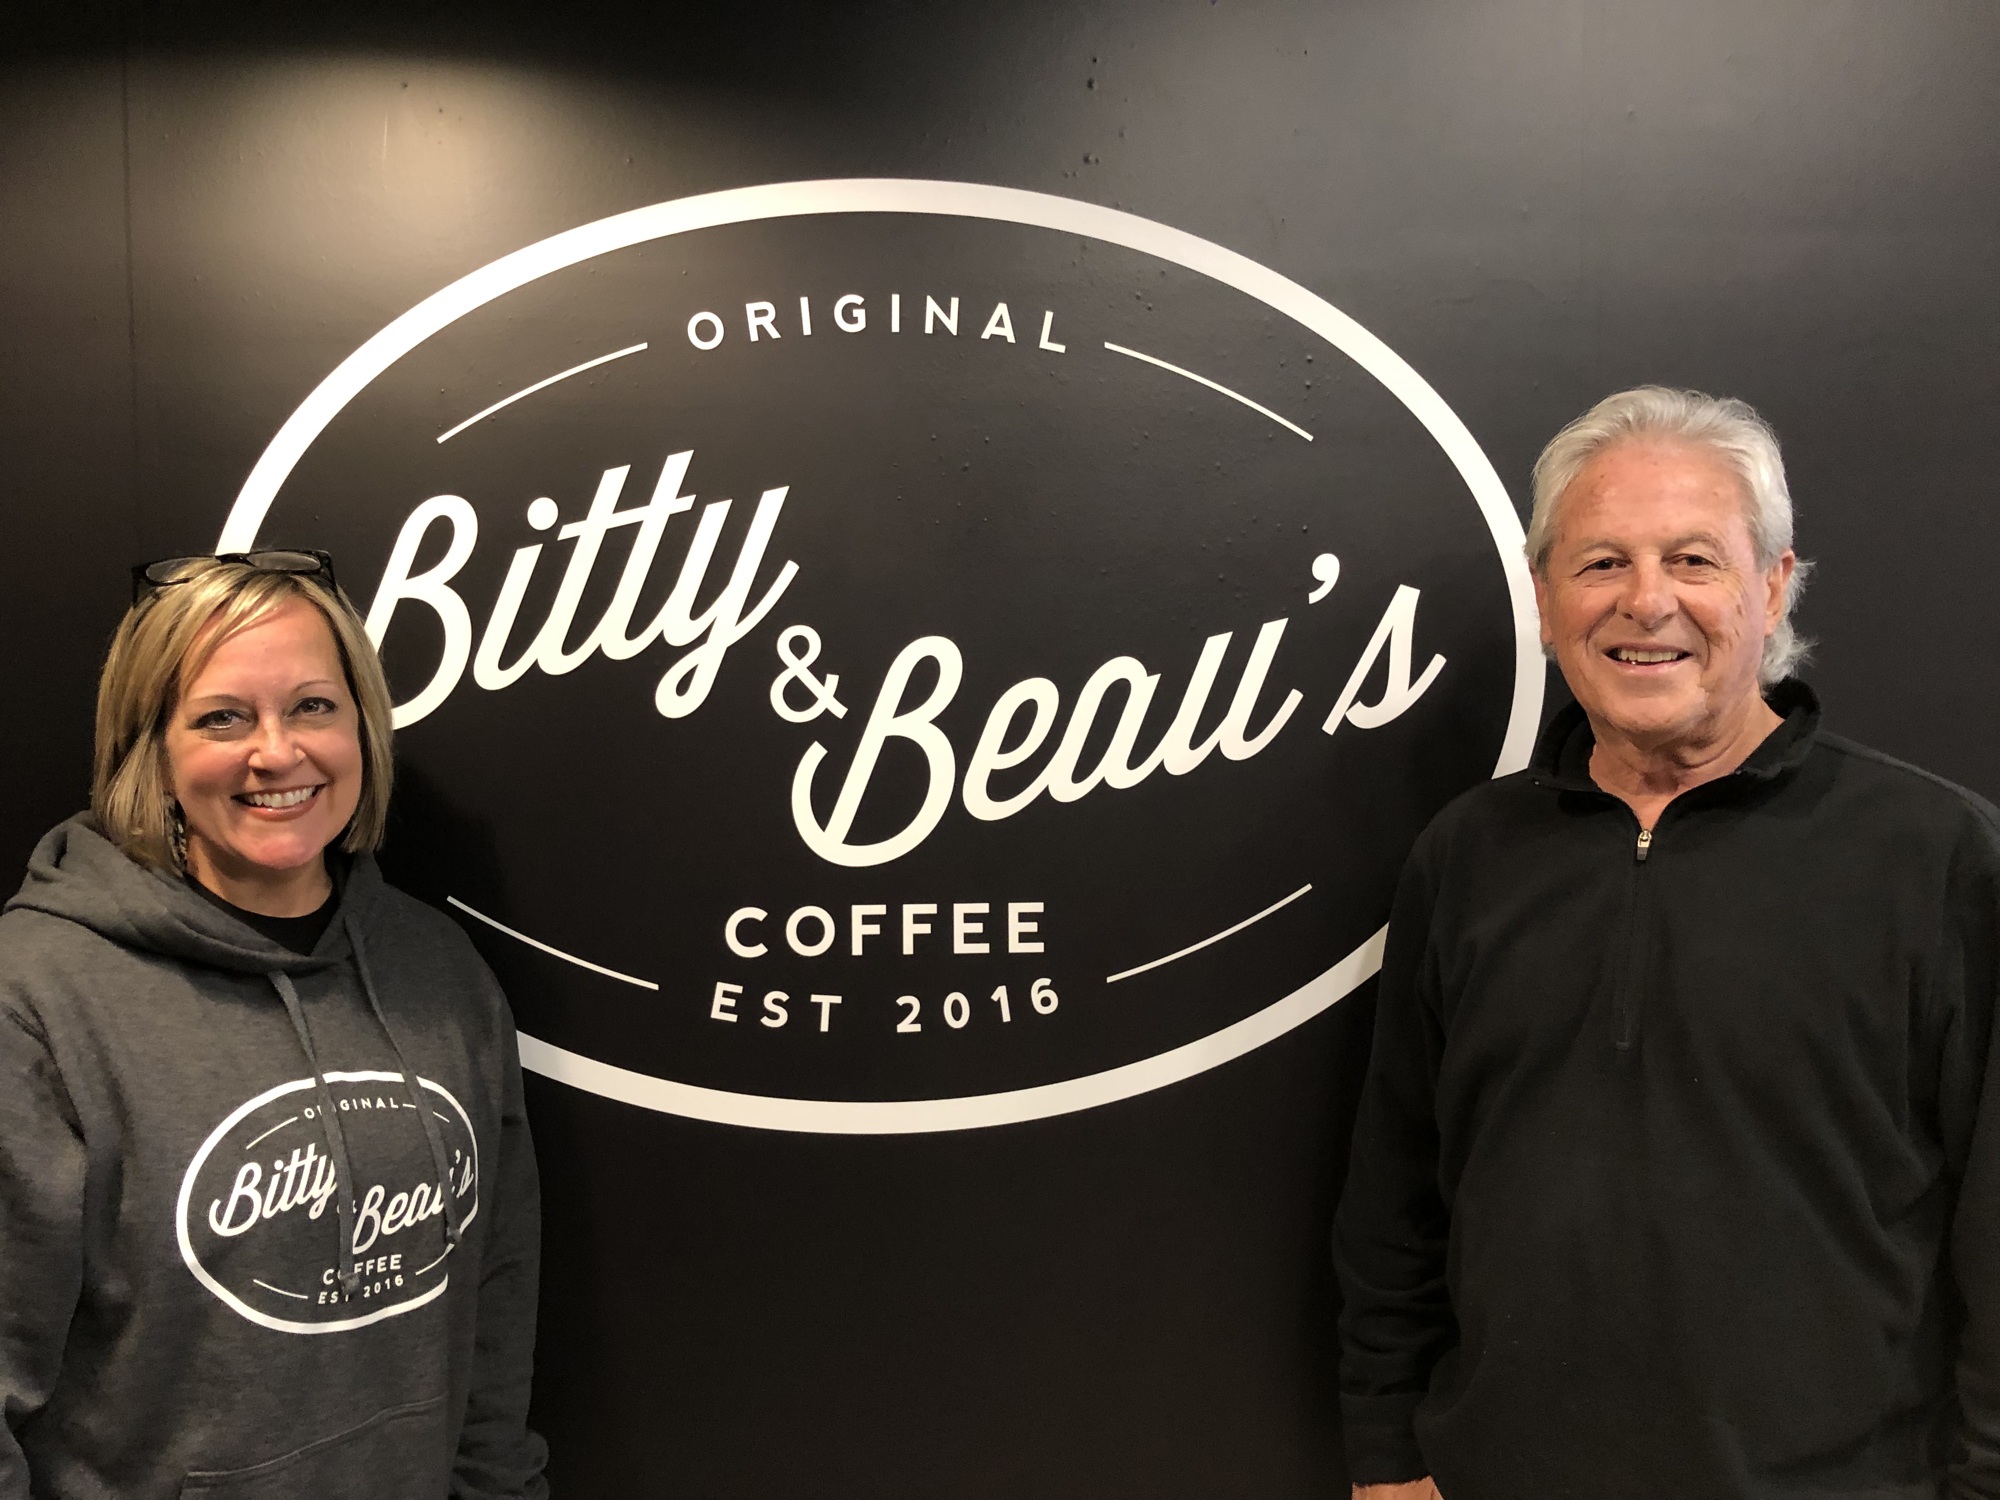 Howard White and Lissie Hurst are the owners of the Bitty & Beau’s Coffee franchise location in Jacksonville.